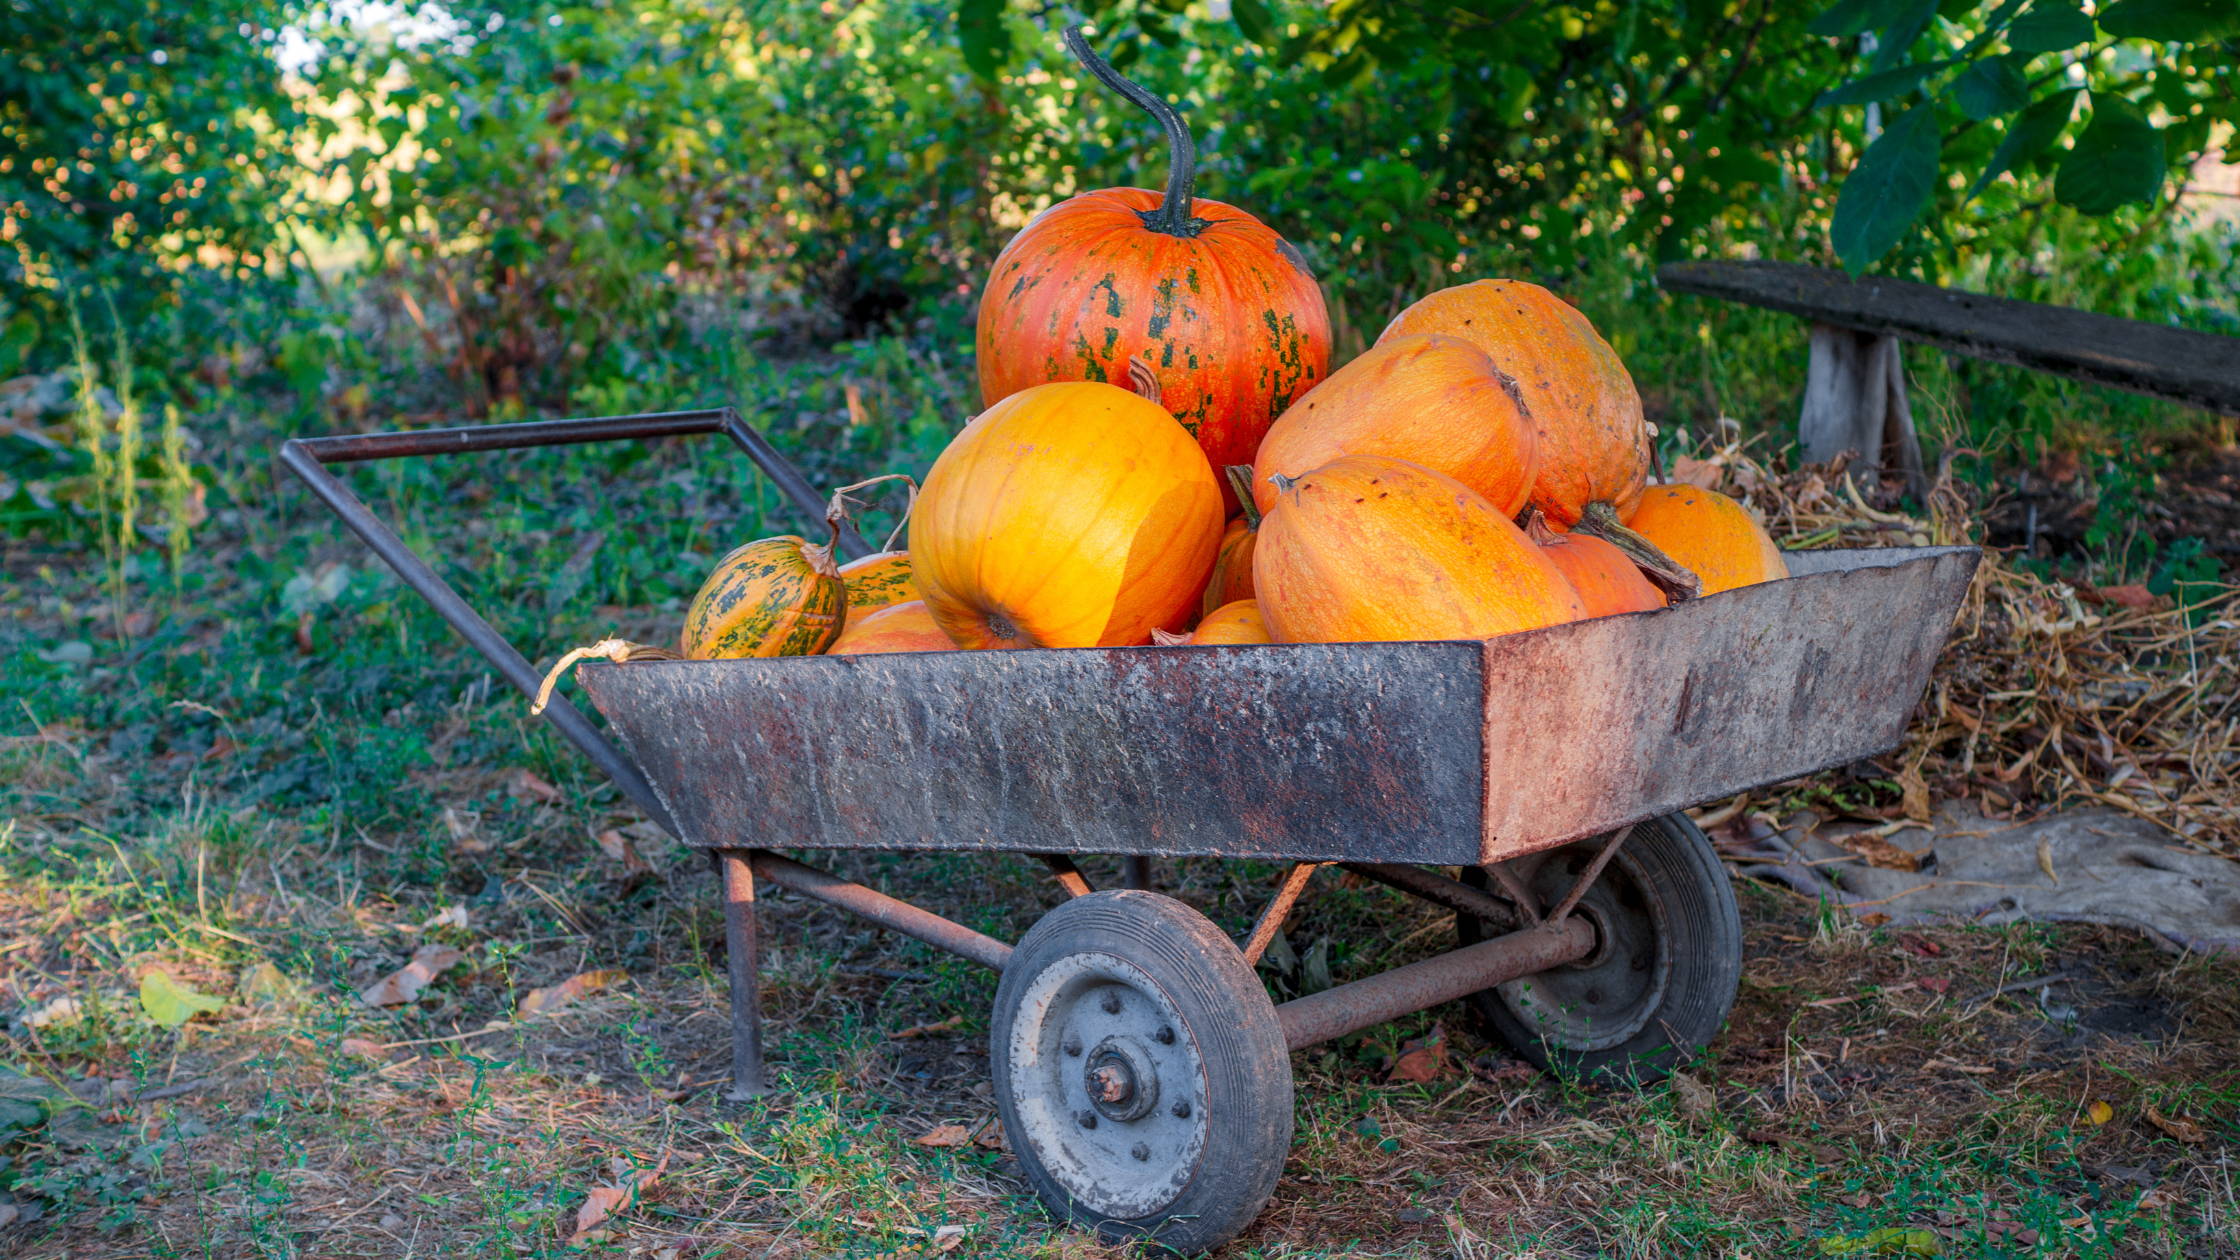 When to sow Pumpkins